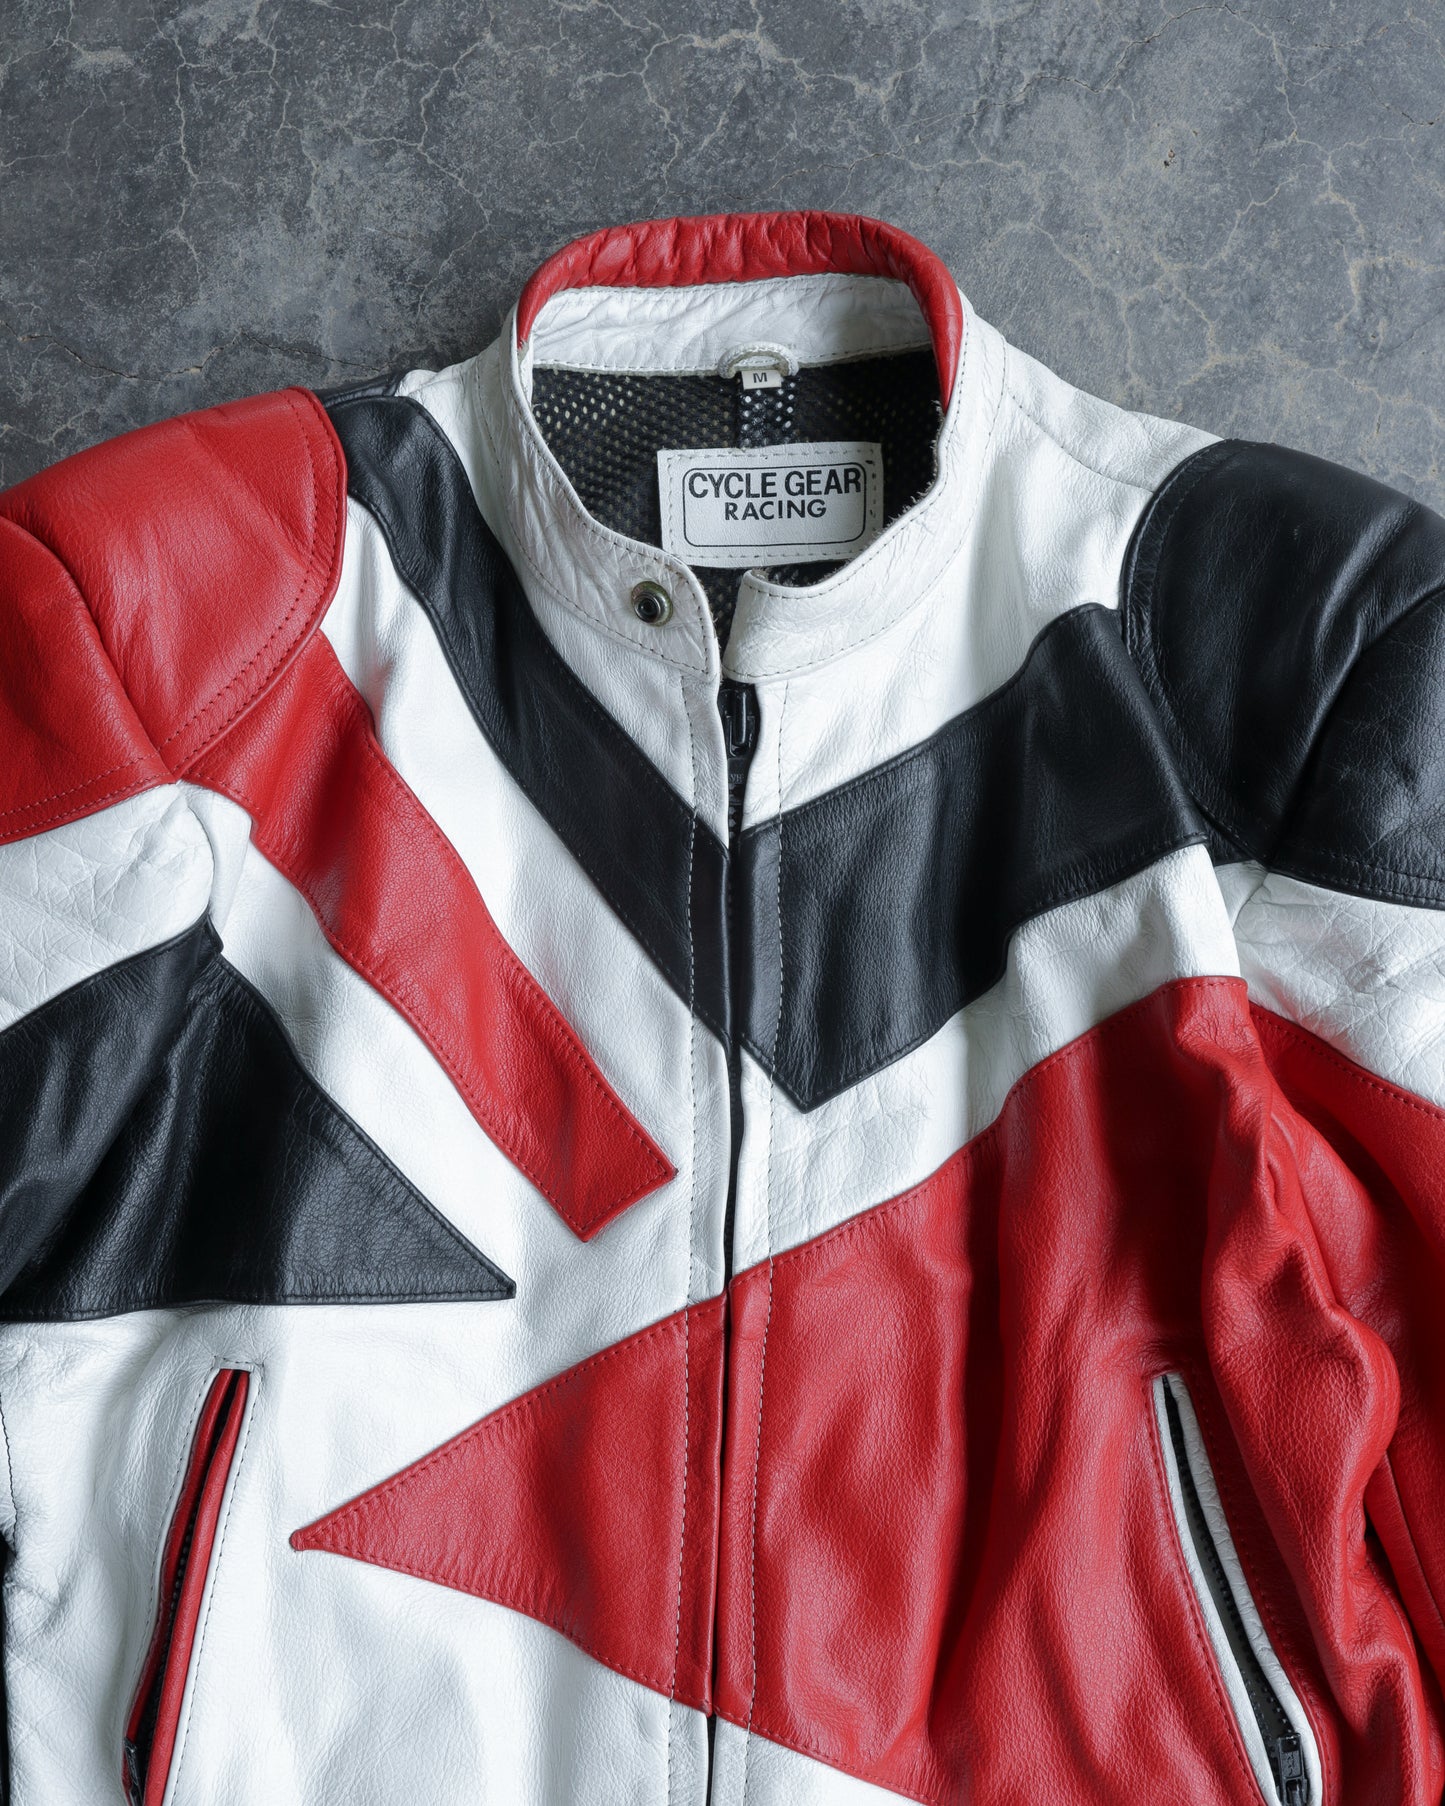 90s Motorcycle Cycle Gear Jacket - M